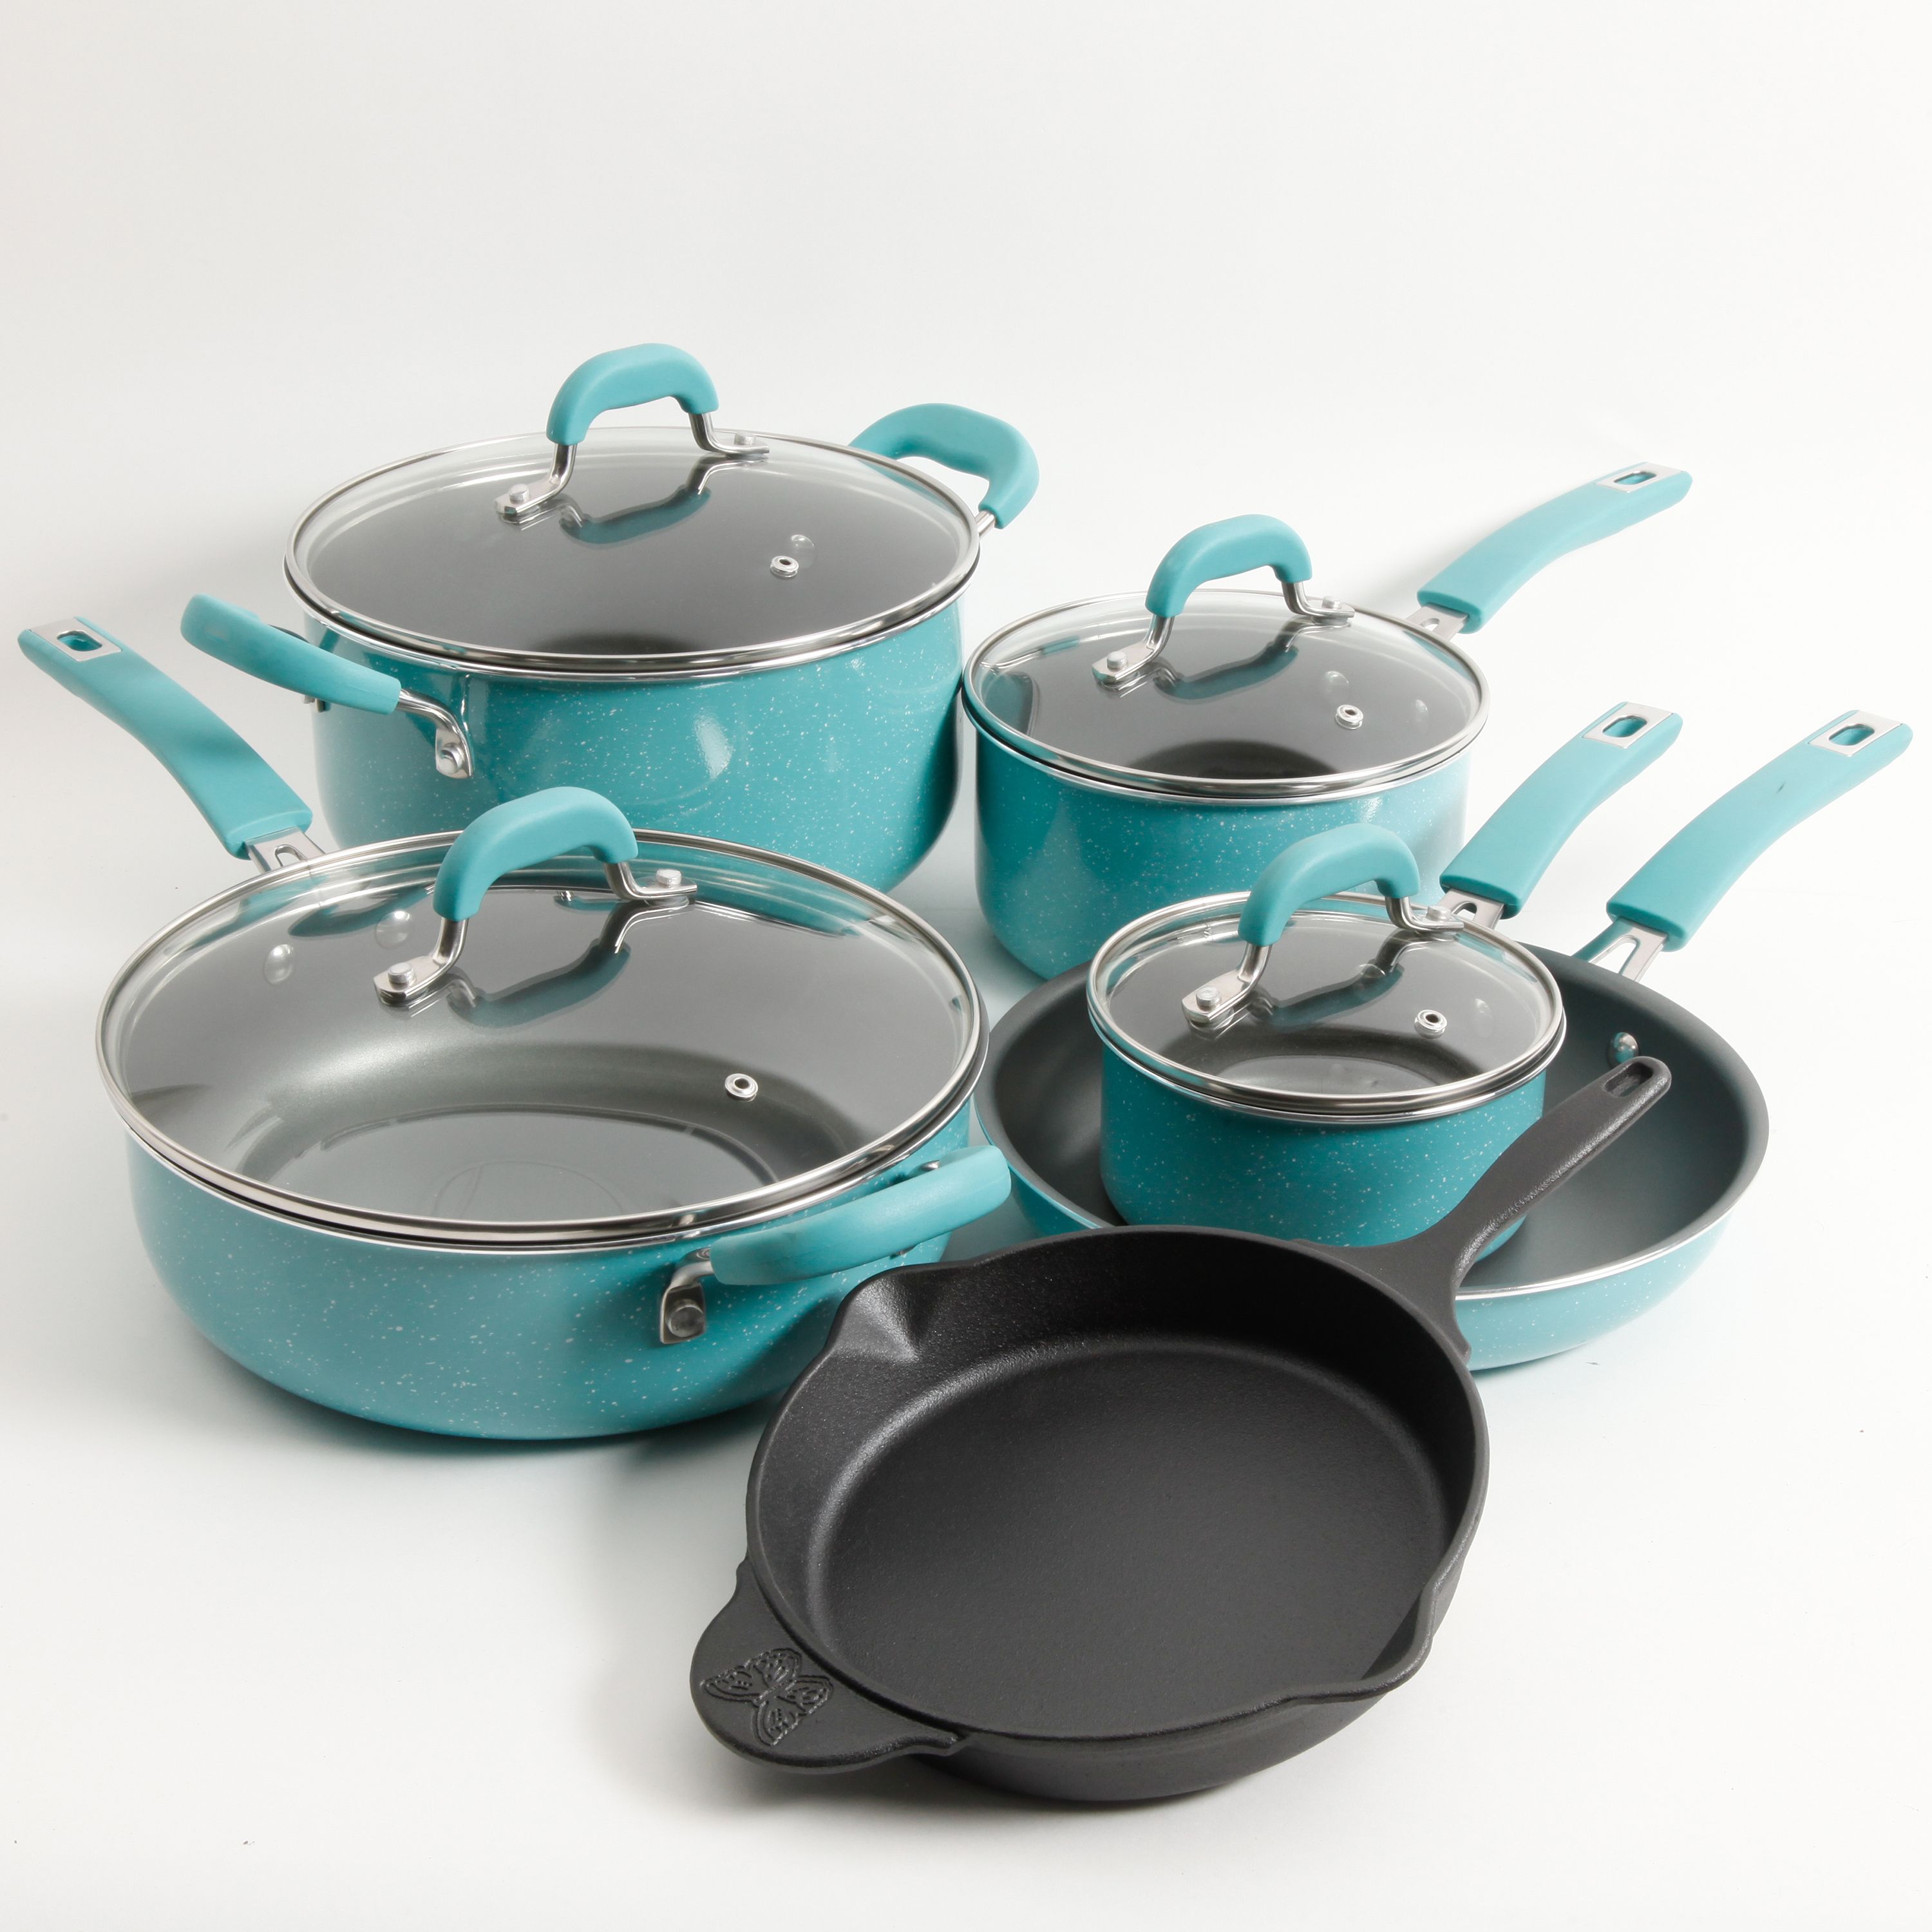 The Pioneer Woman Vintage Speckle & Cast Iron 10-Piece Non-Stick Cookware Set, Turquoise - image 2 of 10